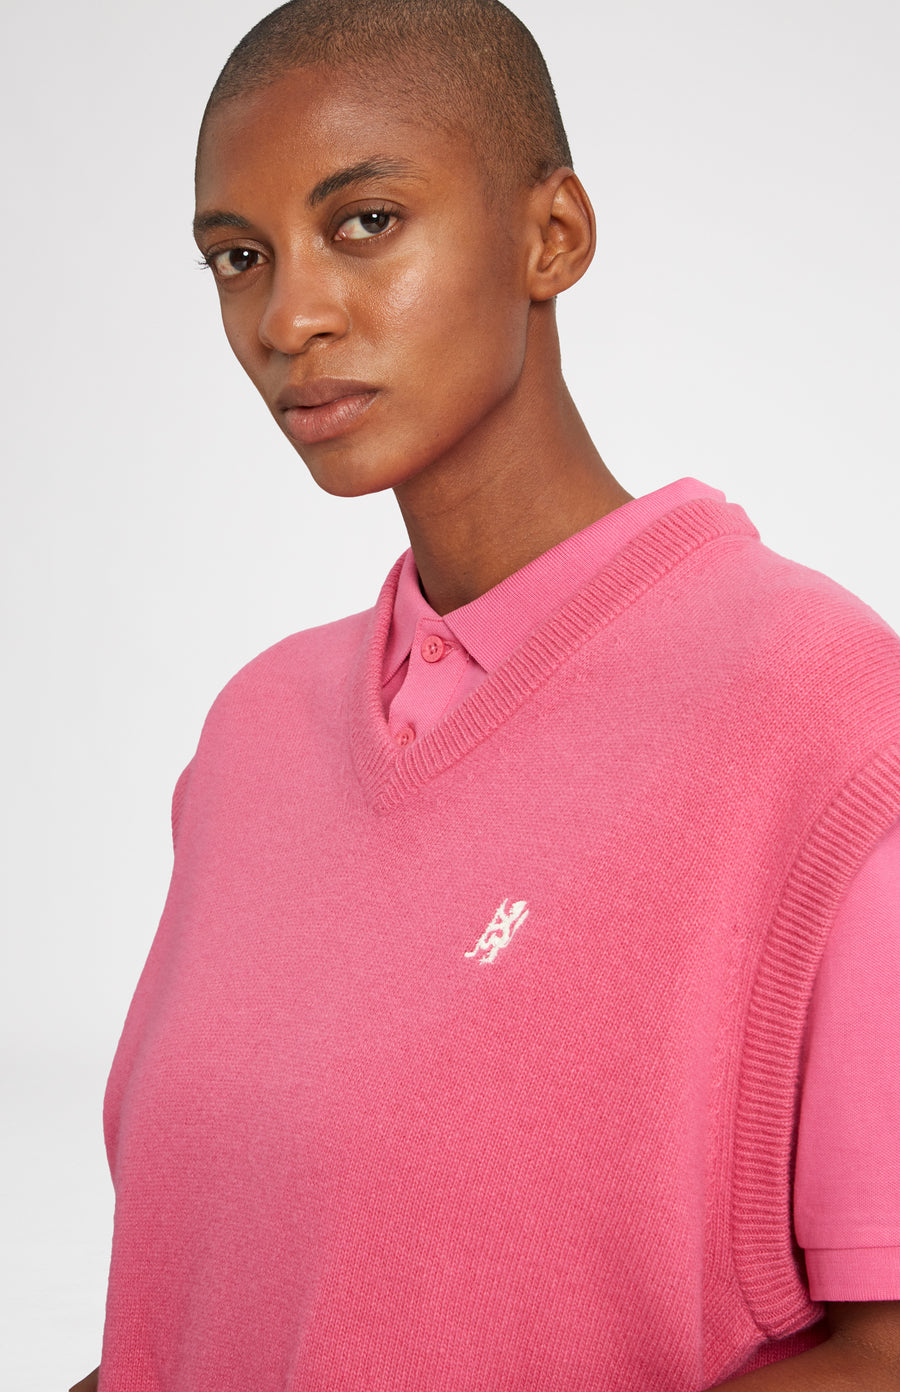 Unisex V Neck Sleeveless Golf Jumper In Heather Pink embroidery close up - Pringle of Scotland